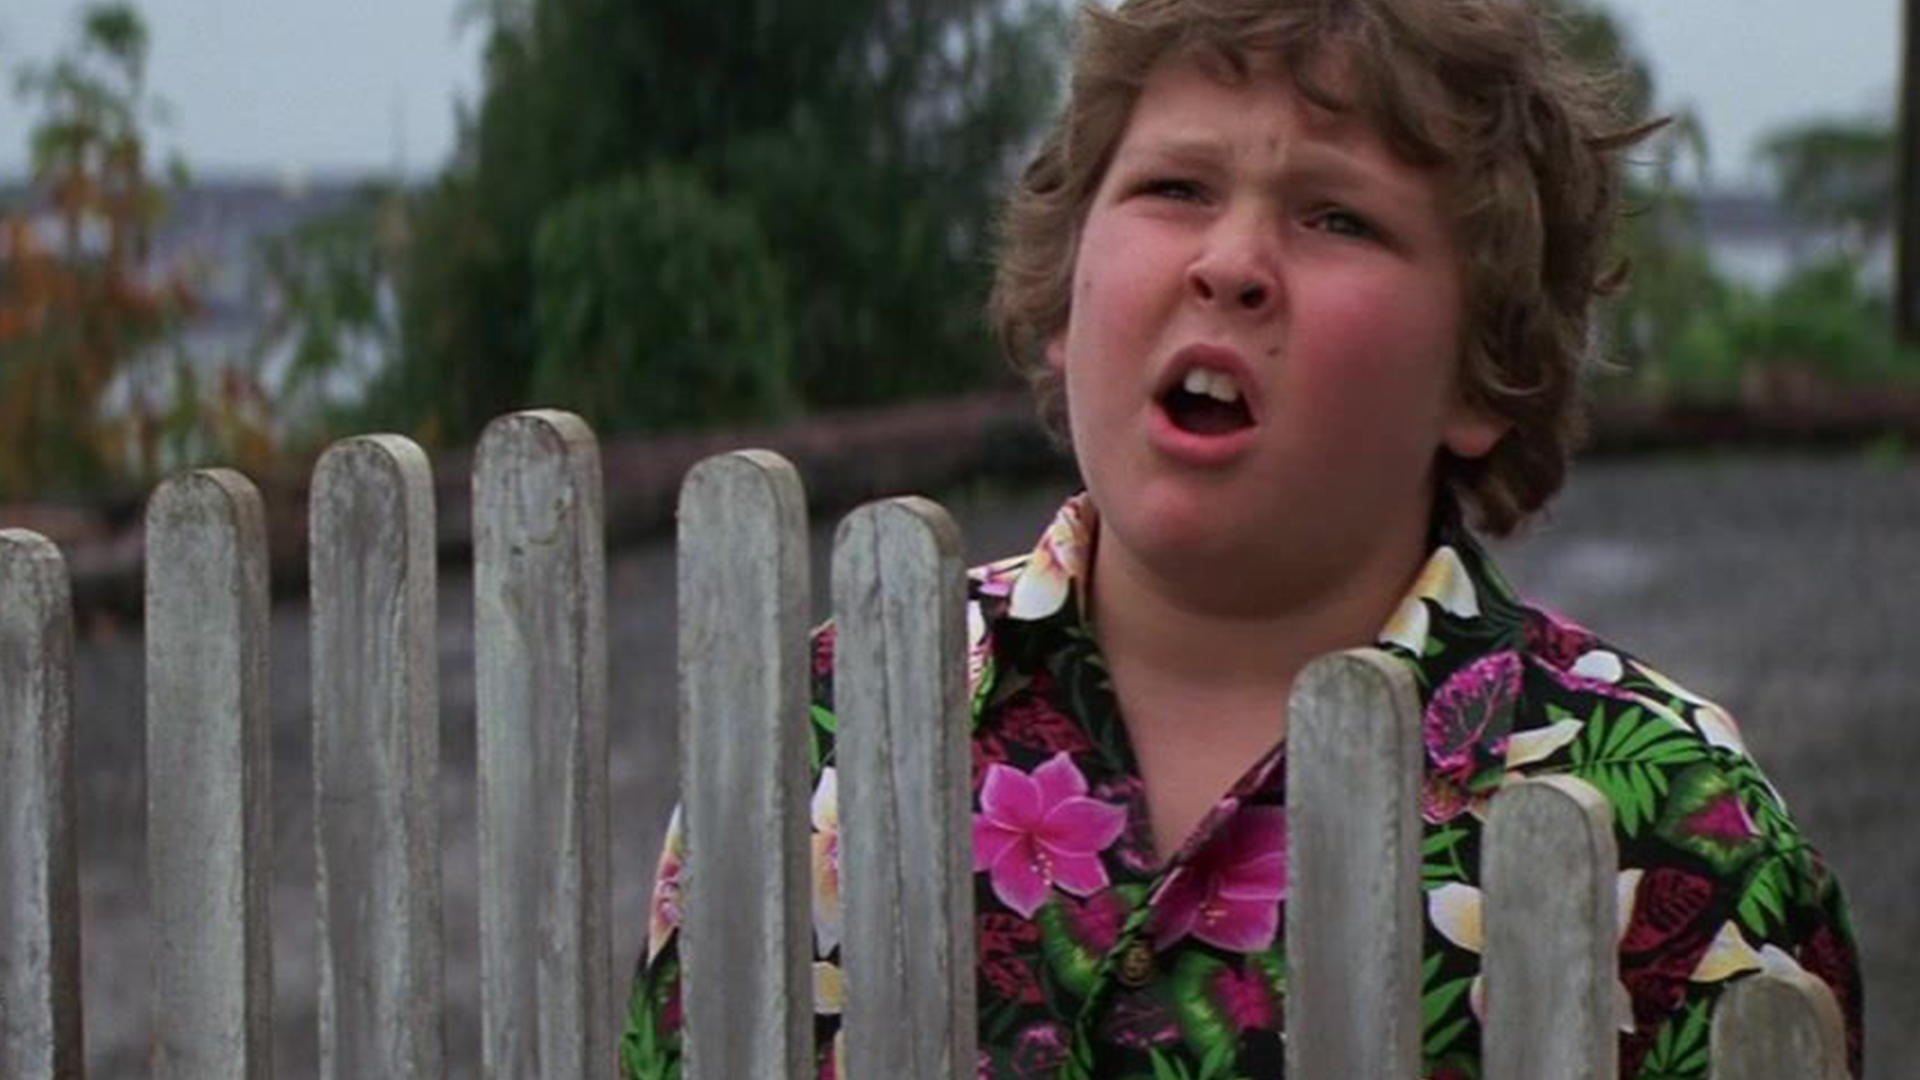 A scene from The Goonies